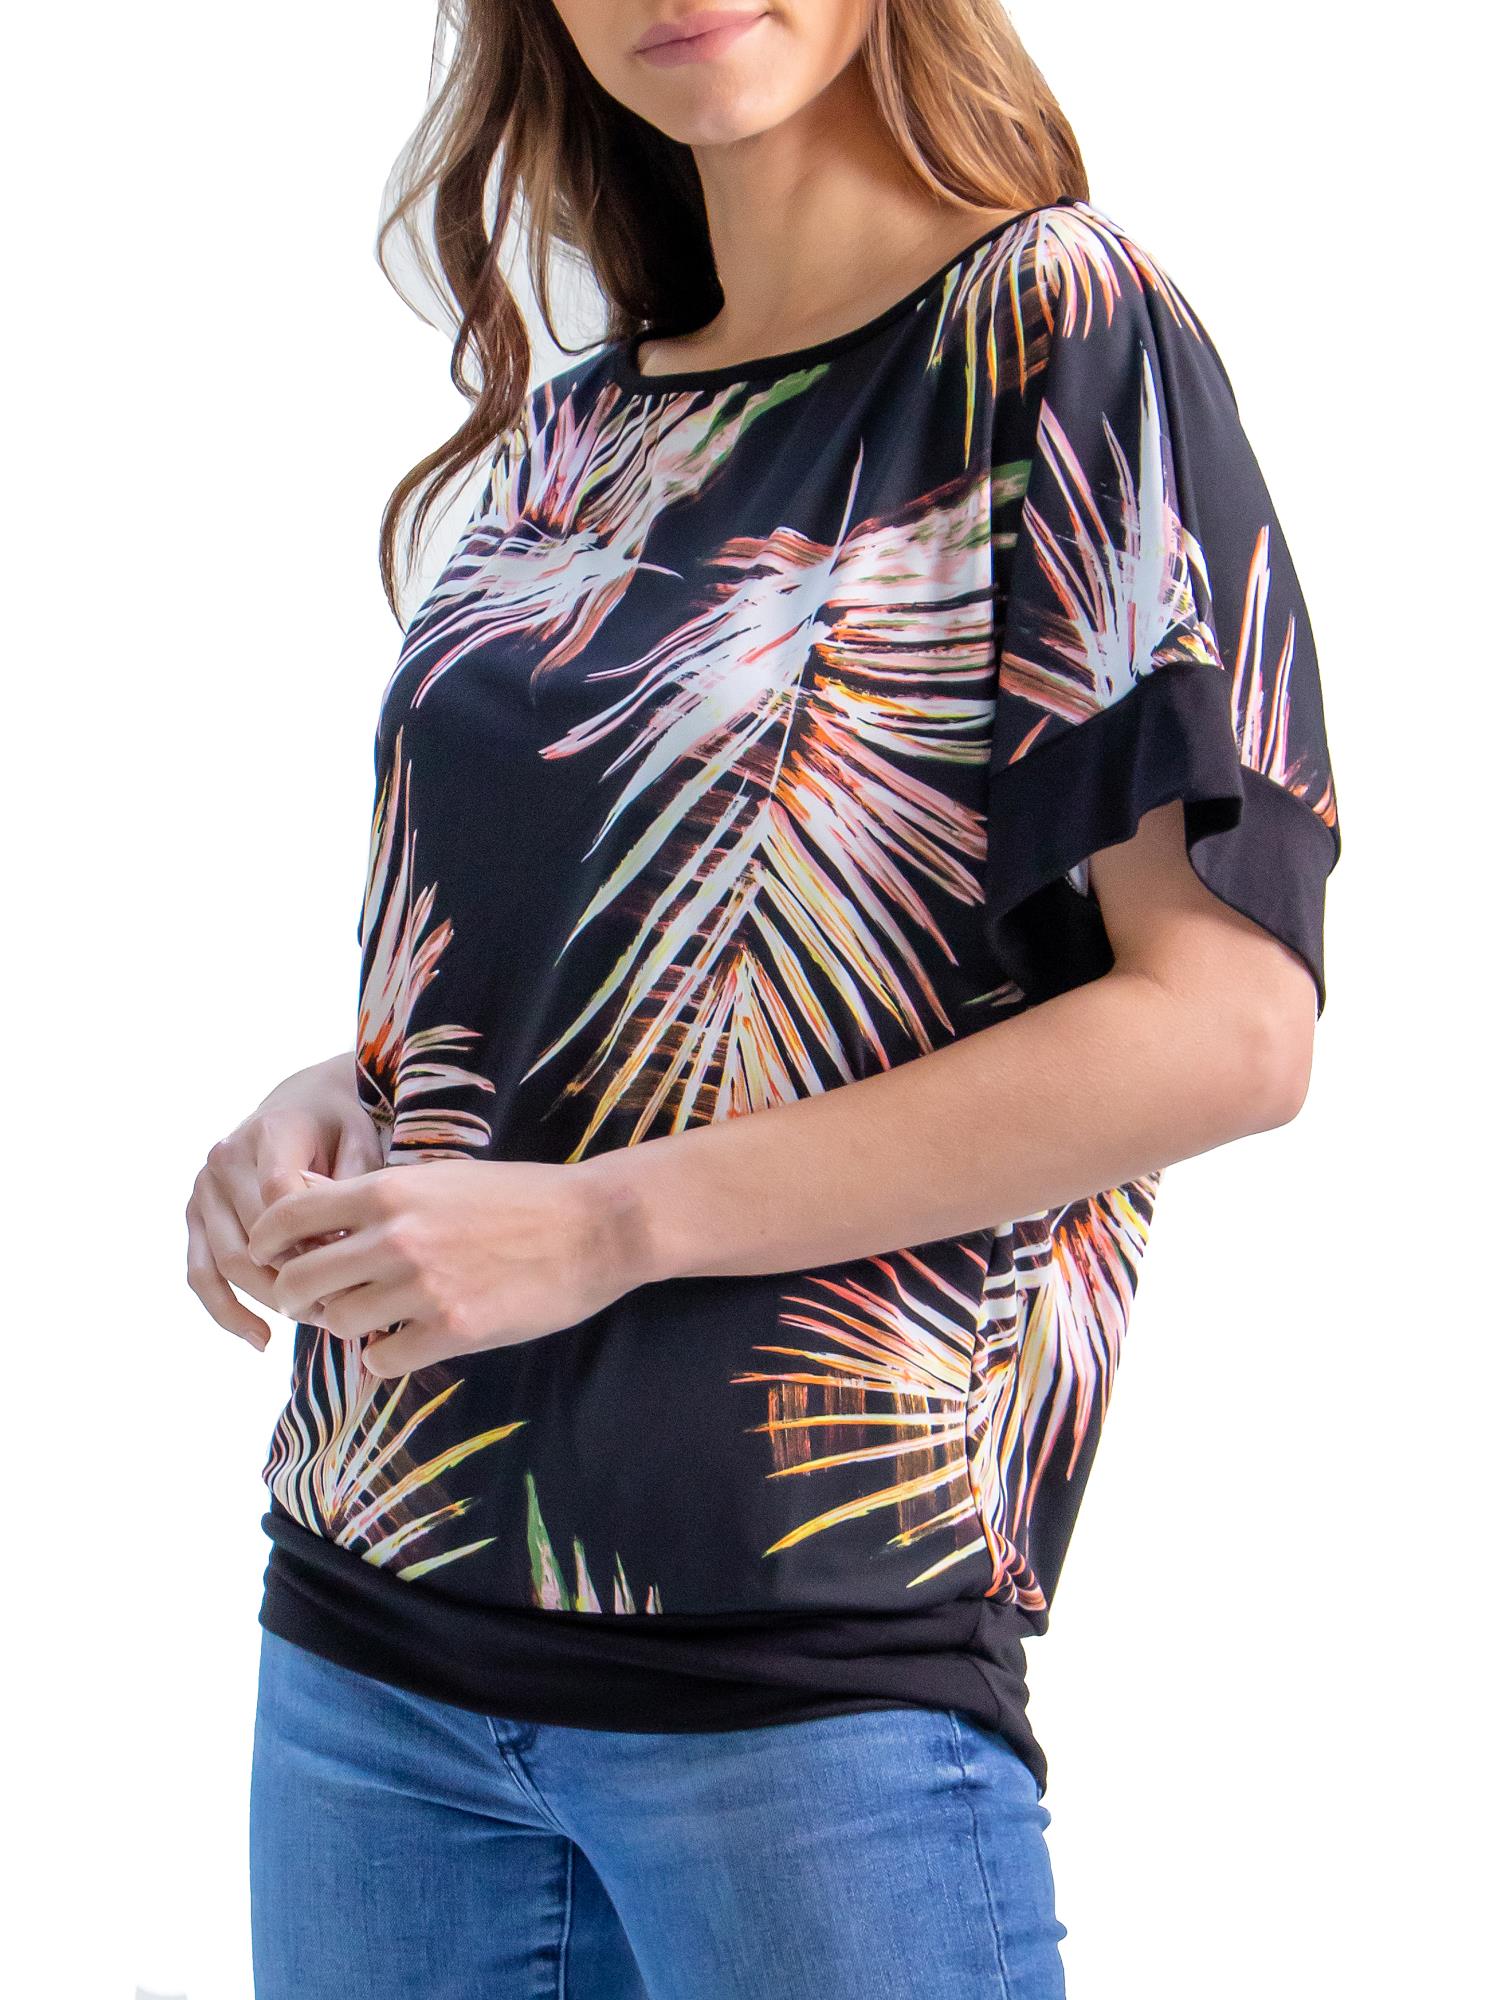 24/7 Comfort Apparel Womens Palm Leaf Print Wide Sleeve Top - image 1 of 3